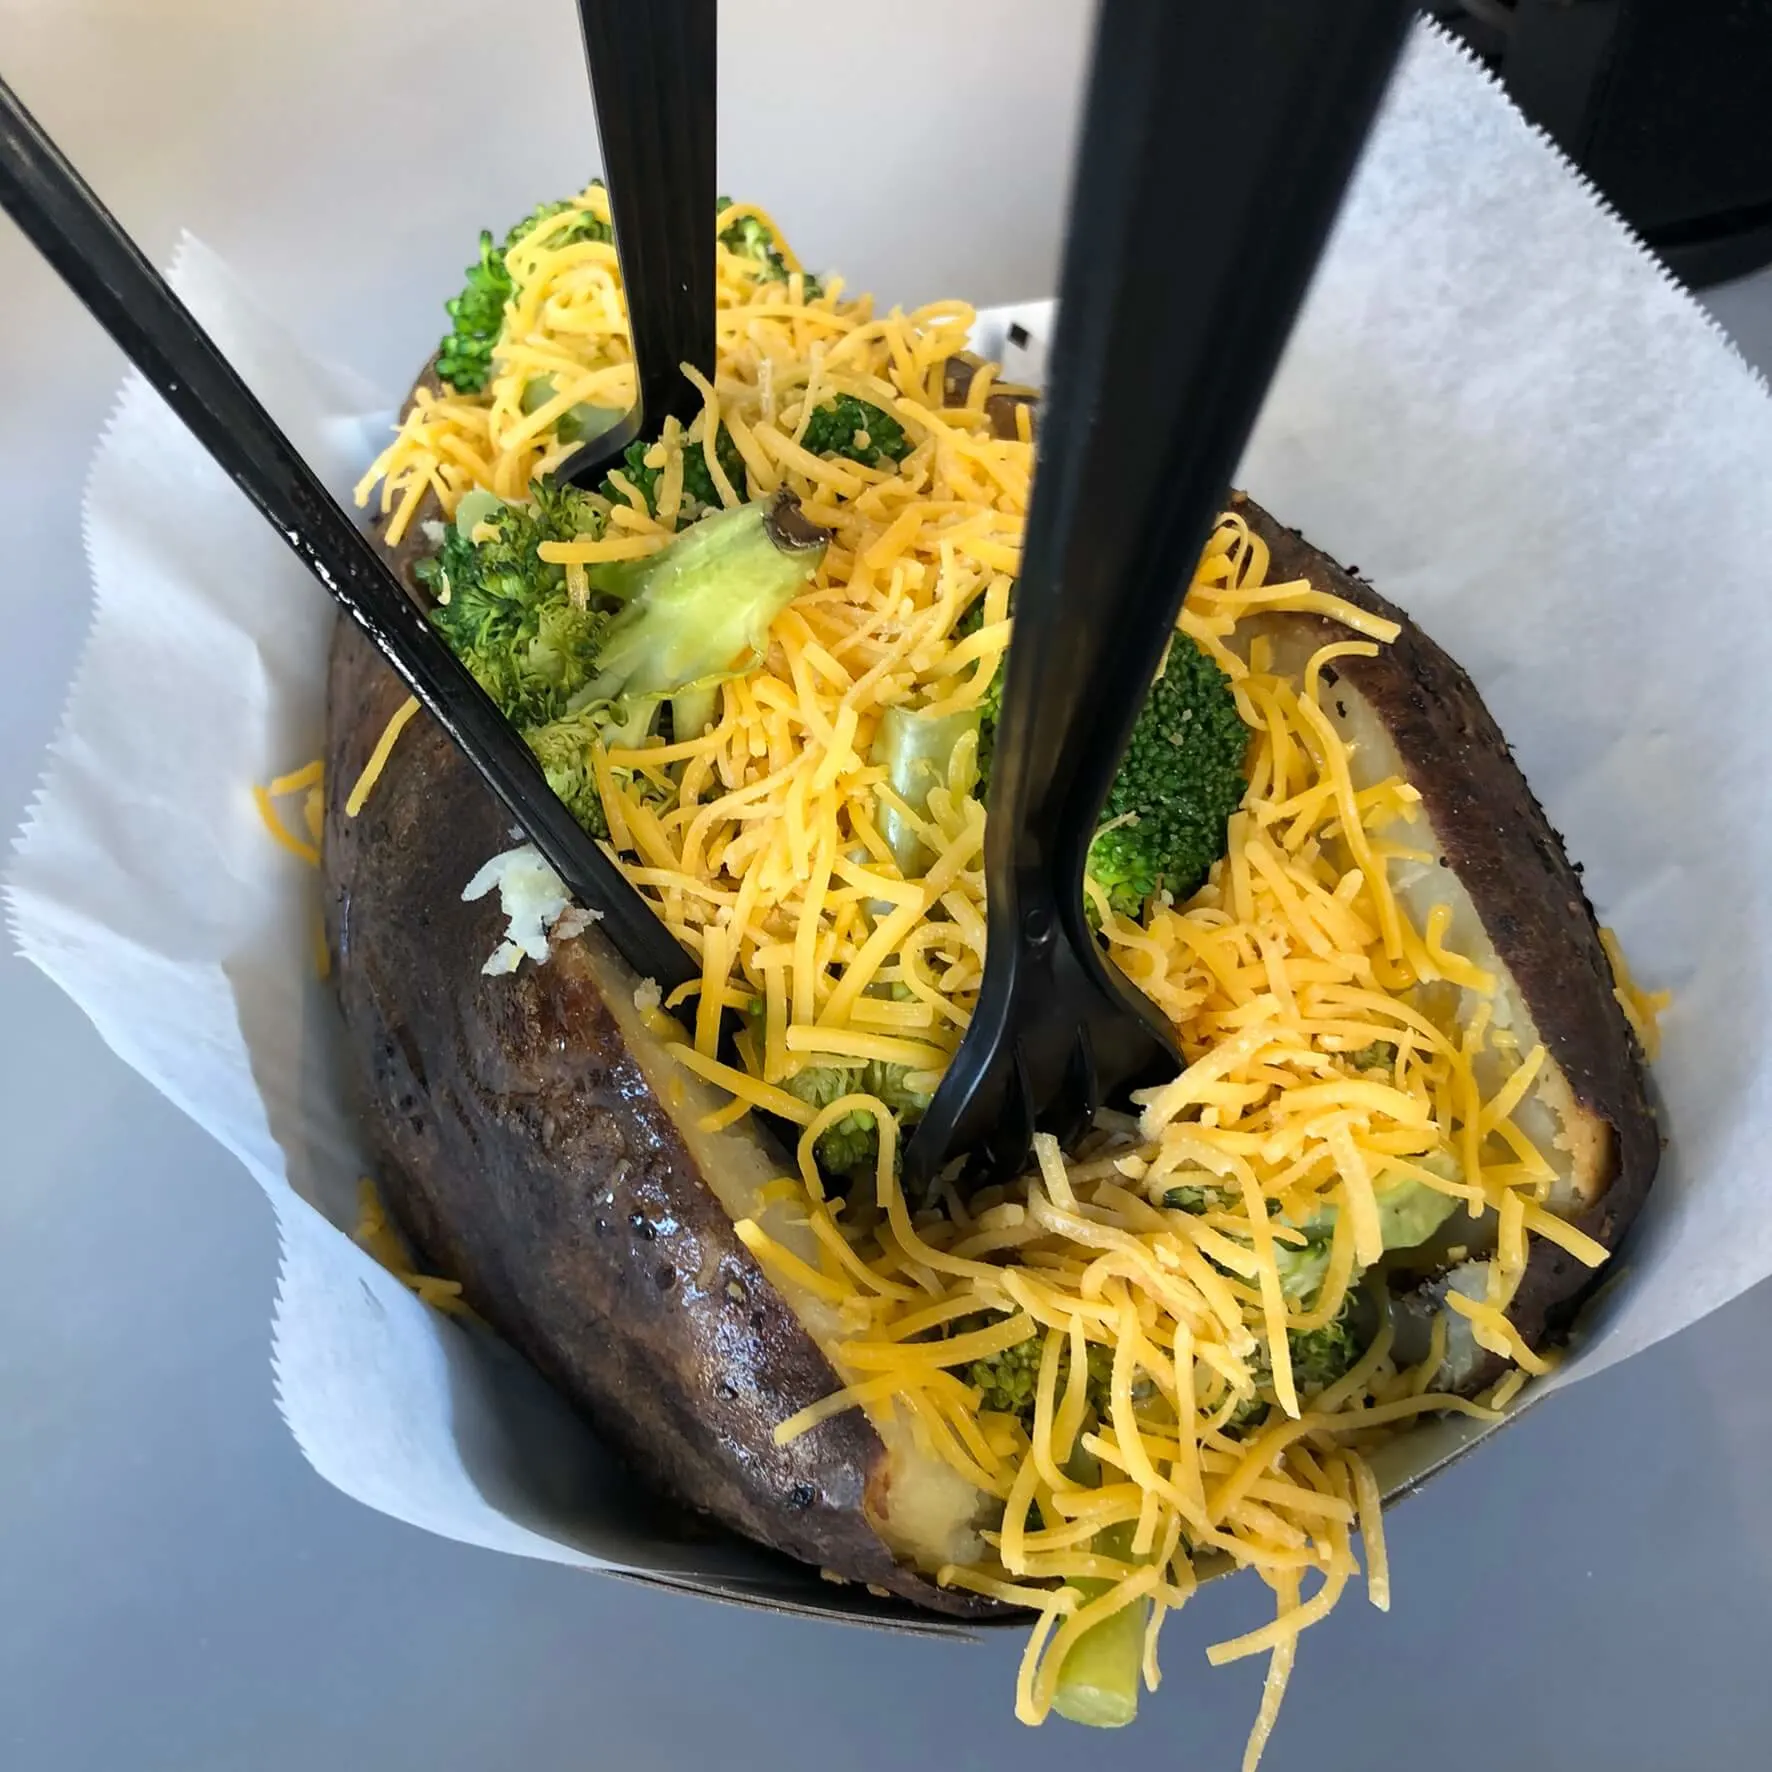 baked potato with cheese and broccoli from universal studios